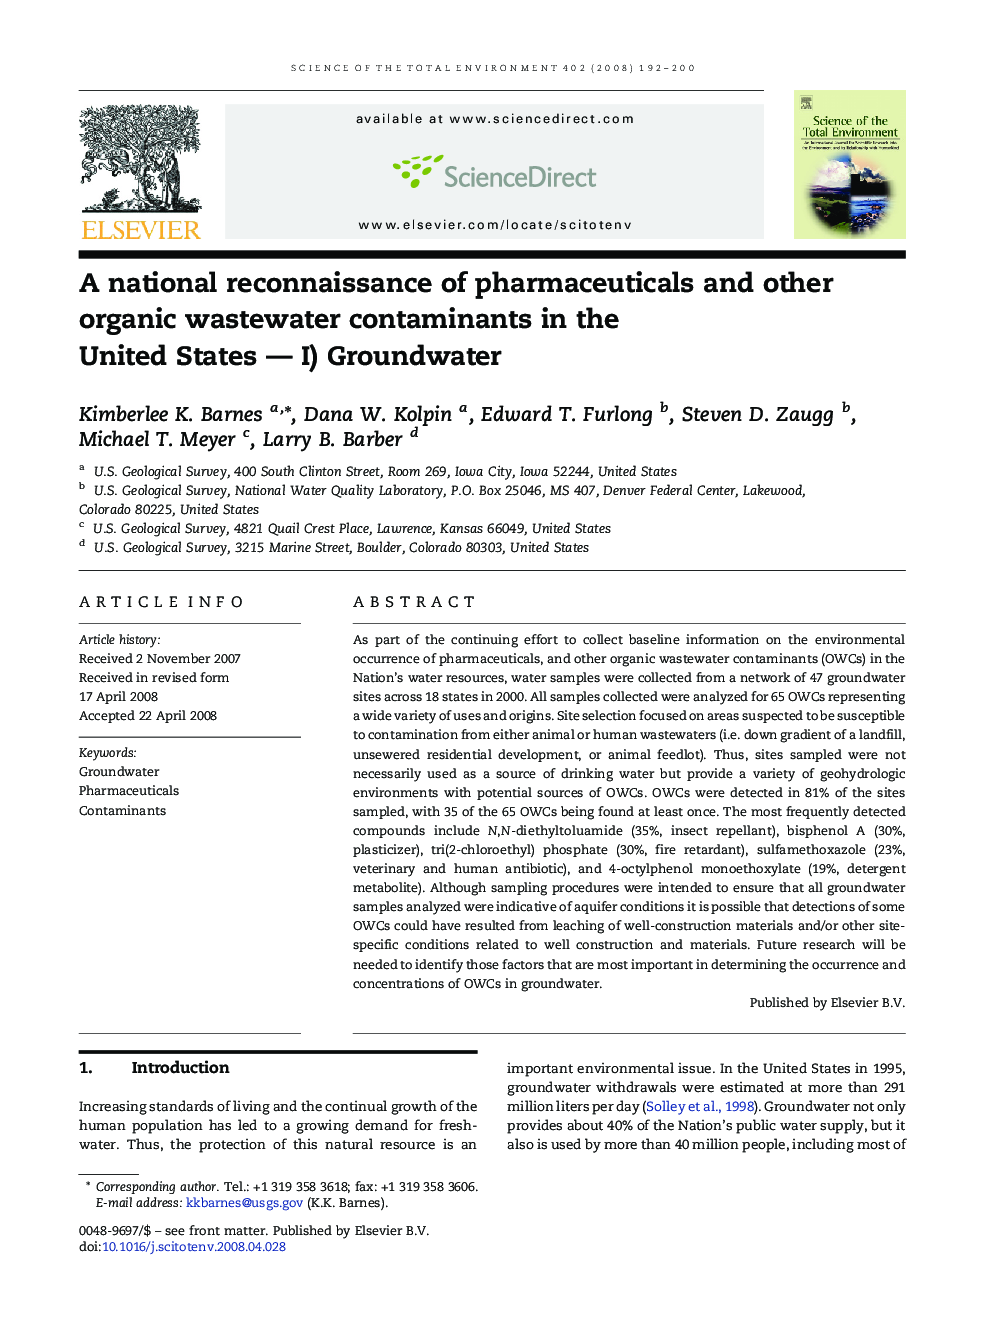 A national reconnaissance of pharmaceuticals and other organic wastewater contaminants in the United States — I) Groundwater